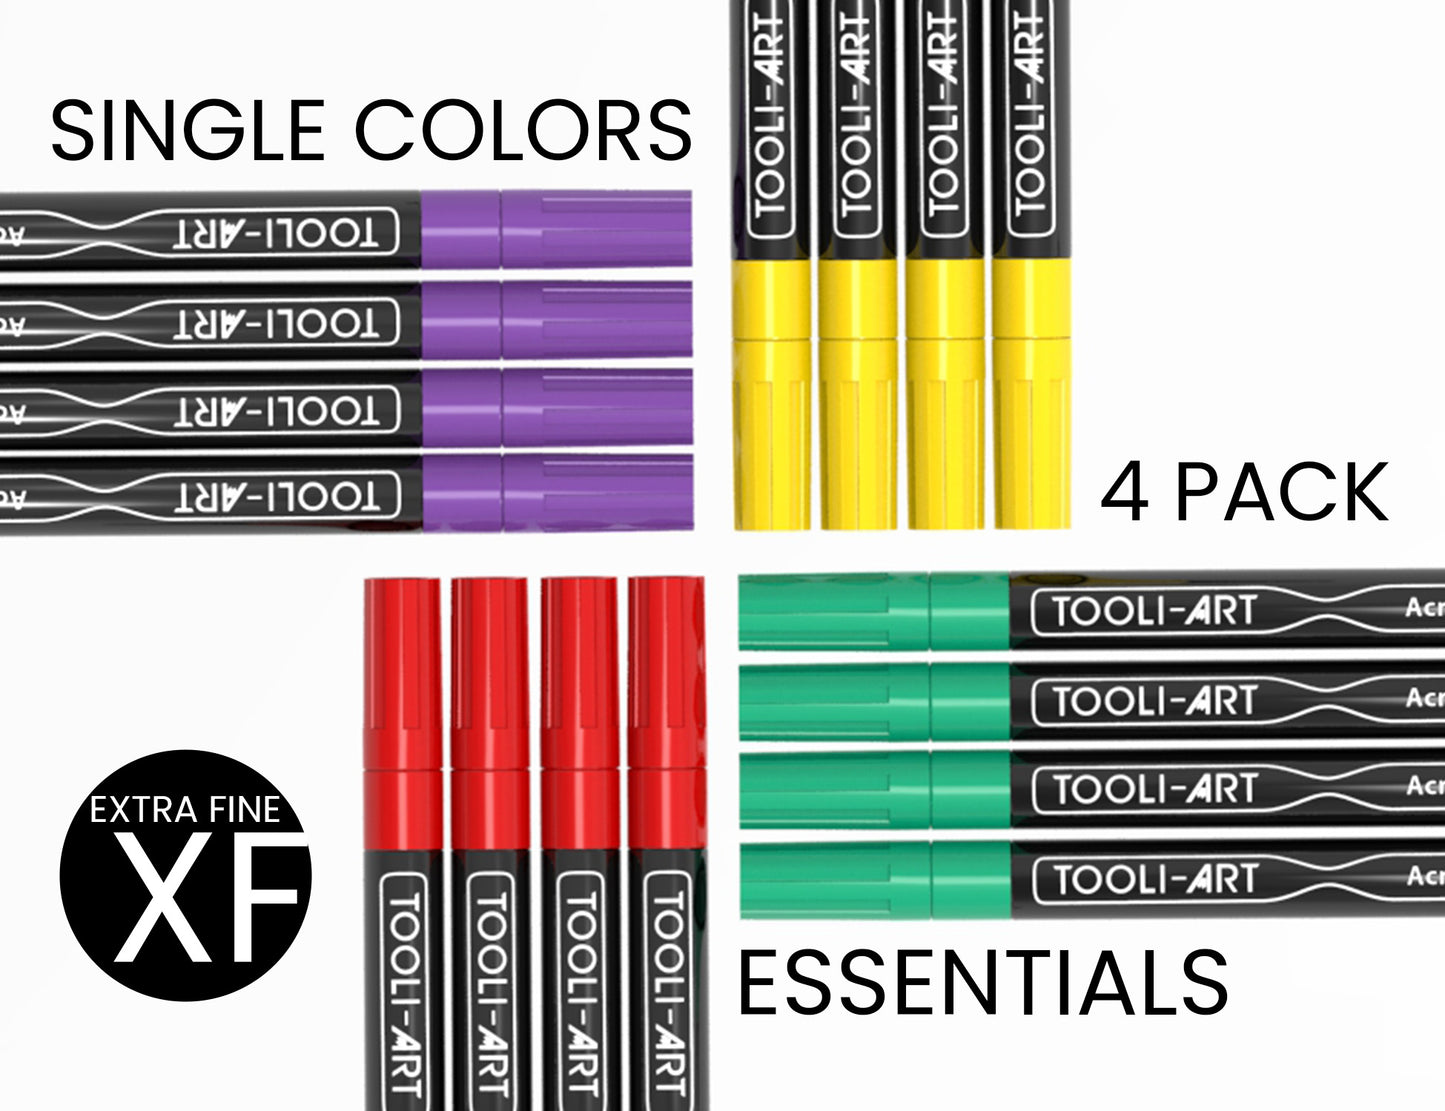 Acrylic Paint Pens 0.7mm EXTRA-FINE Tip: 4-Pack, Your Choice of Any 1 Color